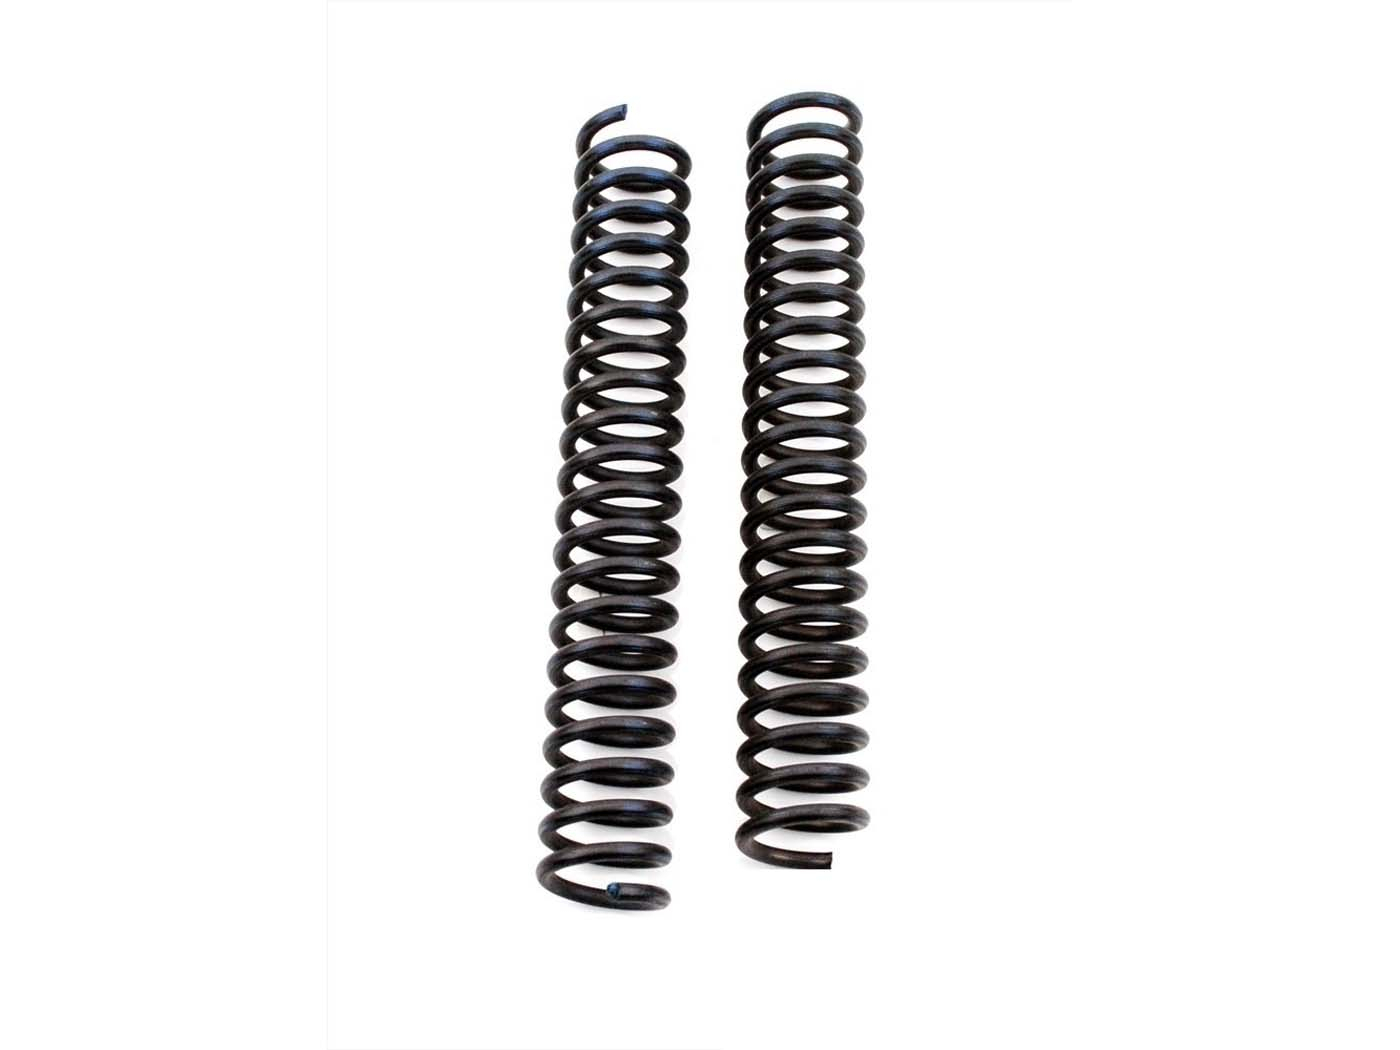 Fork Springs Set Pränafa Total Length Approx. 150mm Inner Diameter Approx. 17mm Outer Diameter Approx. 24mm Wire Approx. 3.4mm For Hercules M 1 Type 506M, M 2 Type 504M, M 5 Type 634 001, P 1 Type 505P, Prima 2N, Prima 2S, Prima 3S, Prima 4N, Prima 4S, P